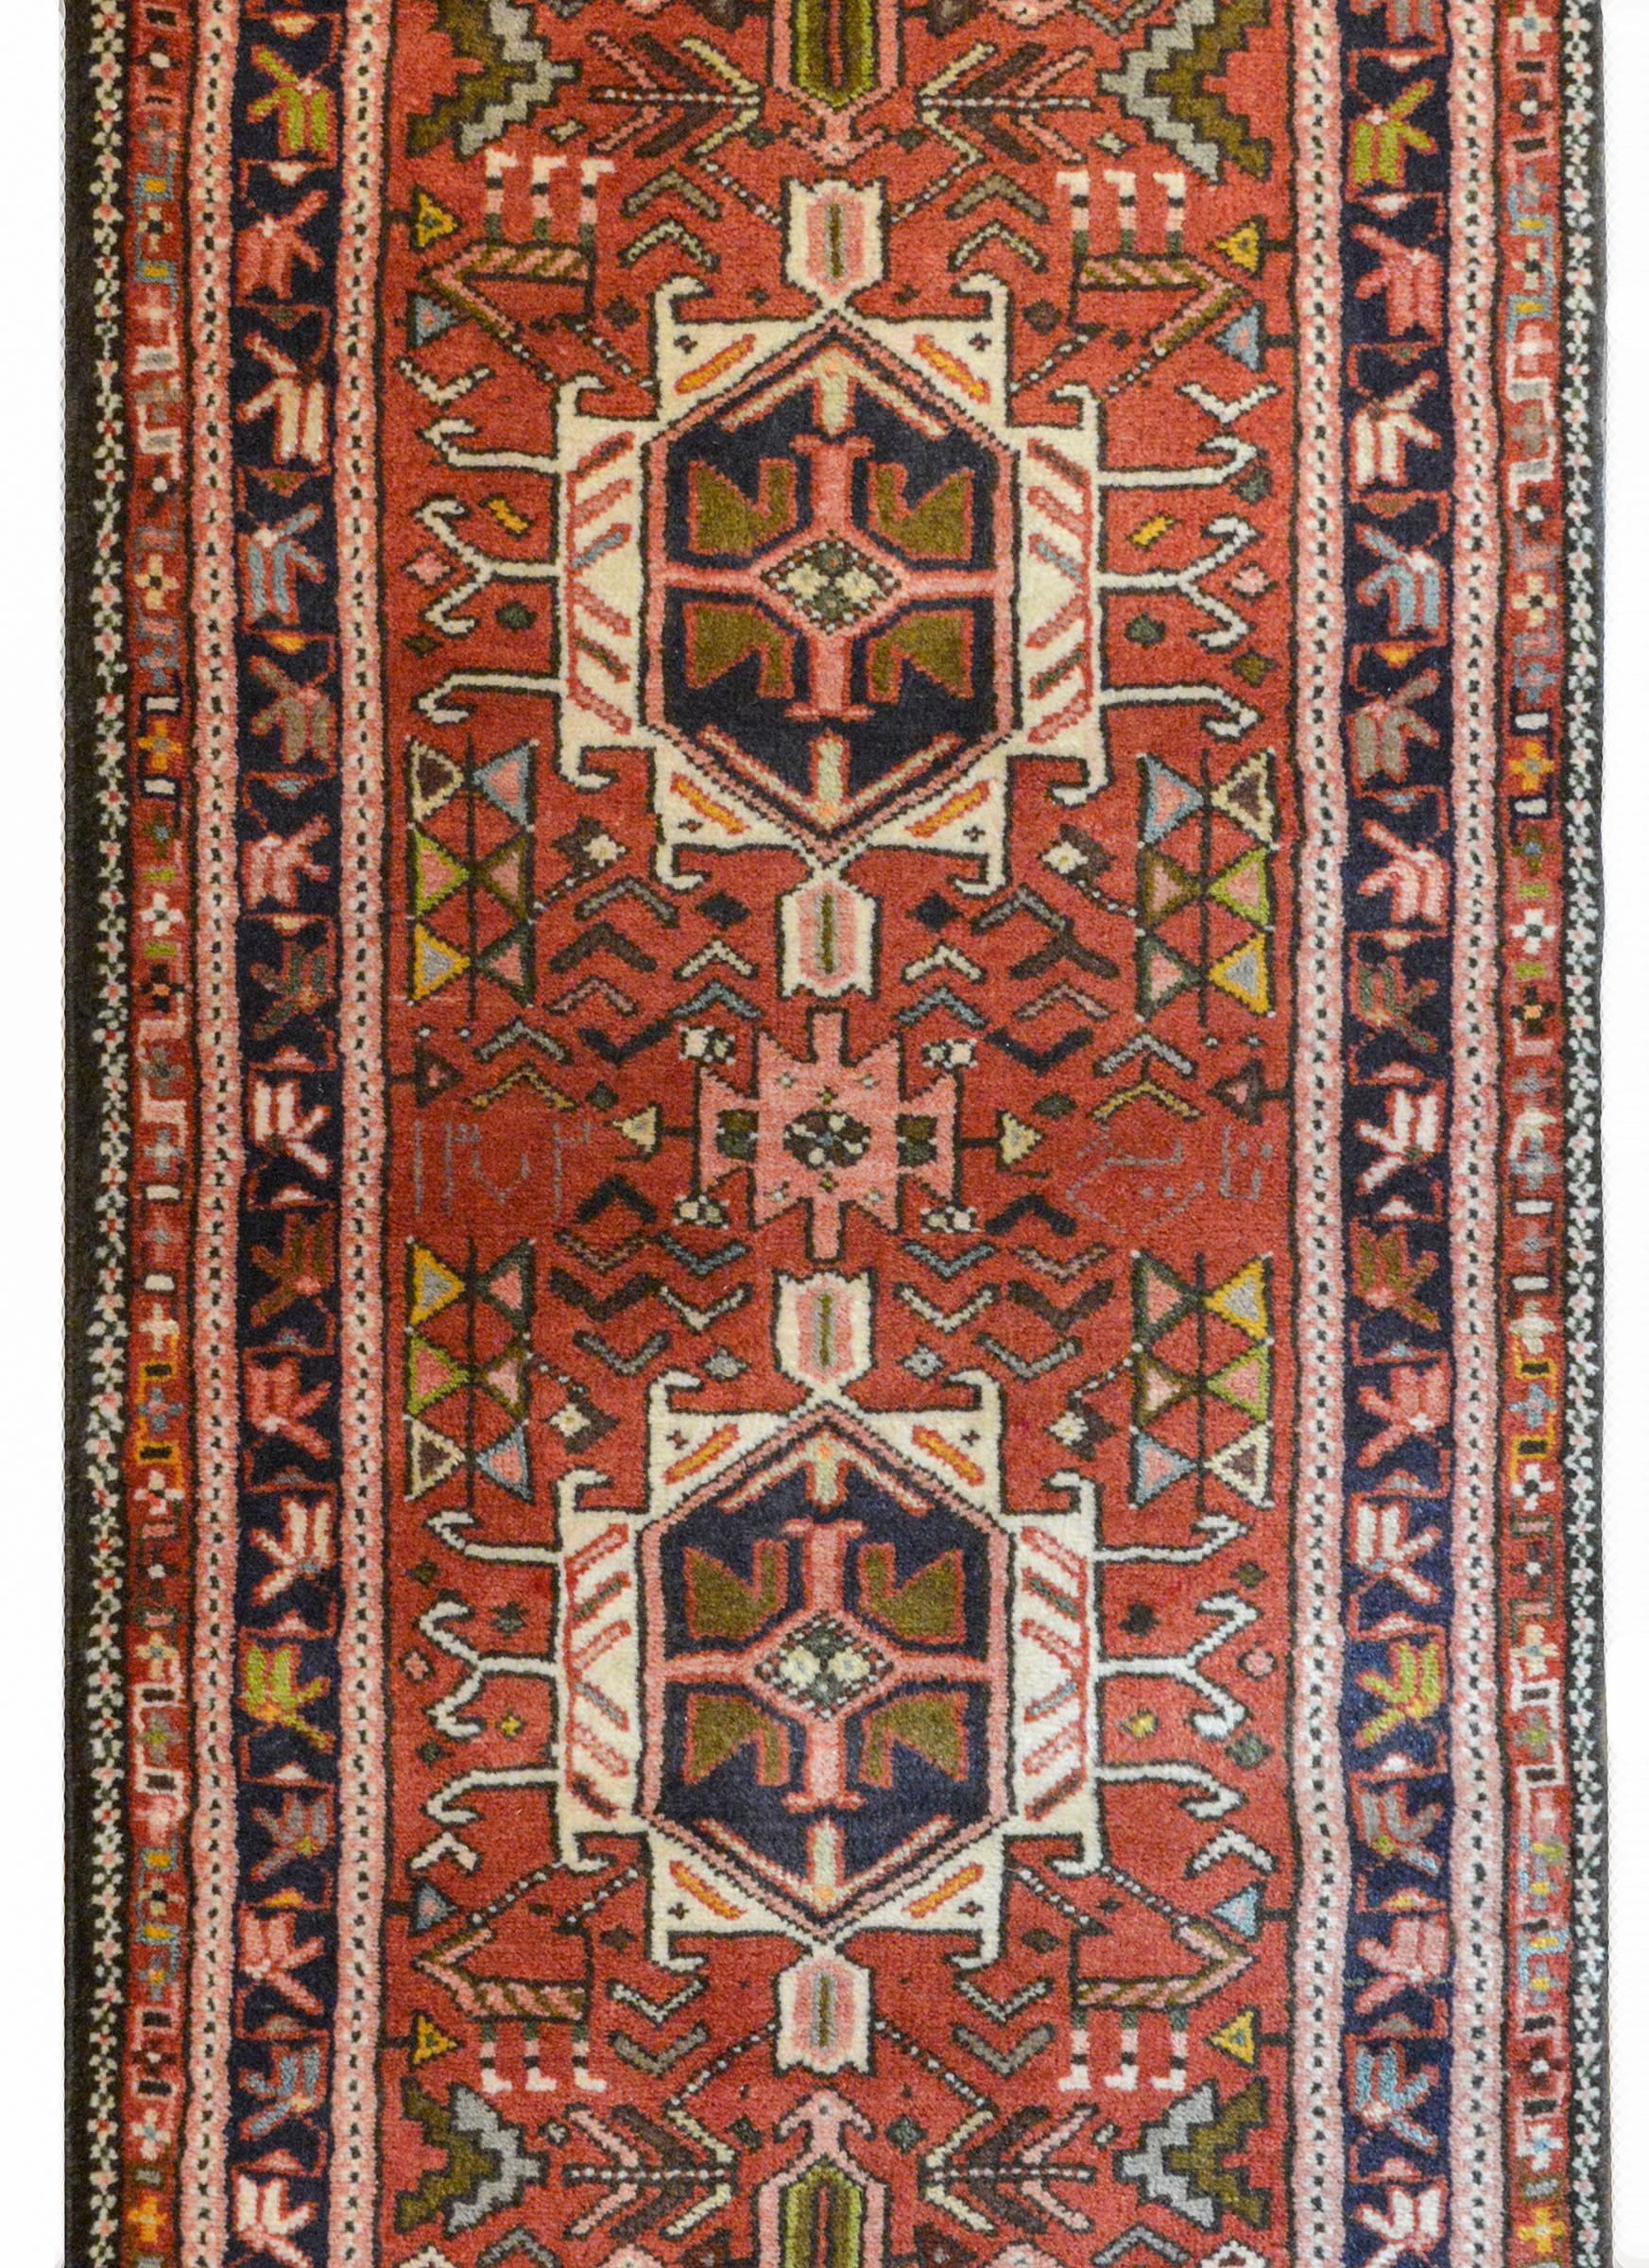 A wonderful early 20th century Persian Karadja runner with several stylized floral medallions woven in black, crimson, light blue, gold, and pale green amidst a field of more stylized flowers against a crimson background. The border is wonderful